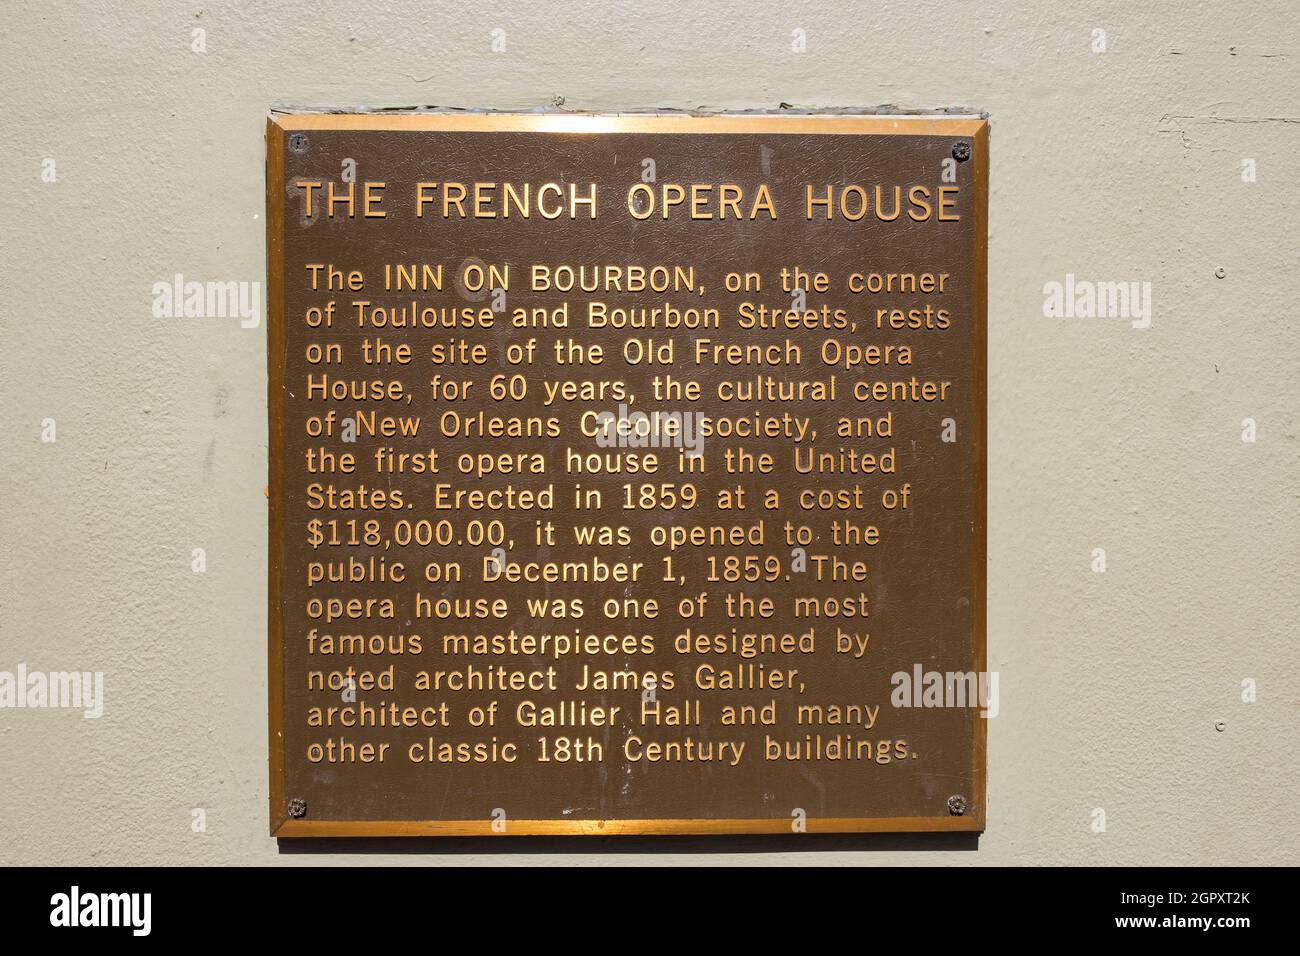 NEW ORLEANS, LA, USA -SEPTEMBER 26, 2021: The French Opera House plaque in the French Quarter Stock Photo